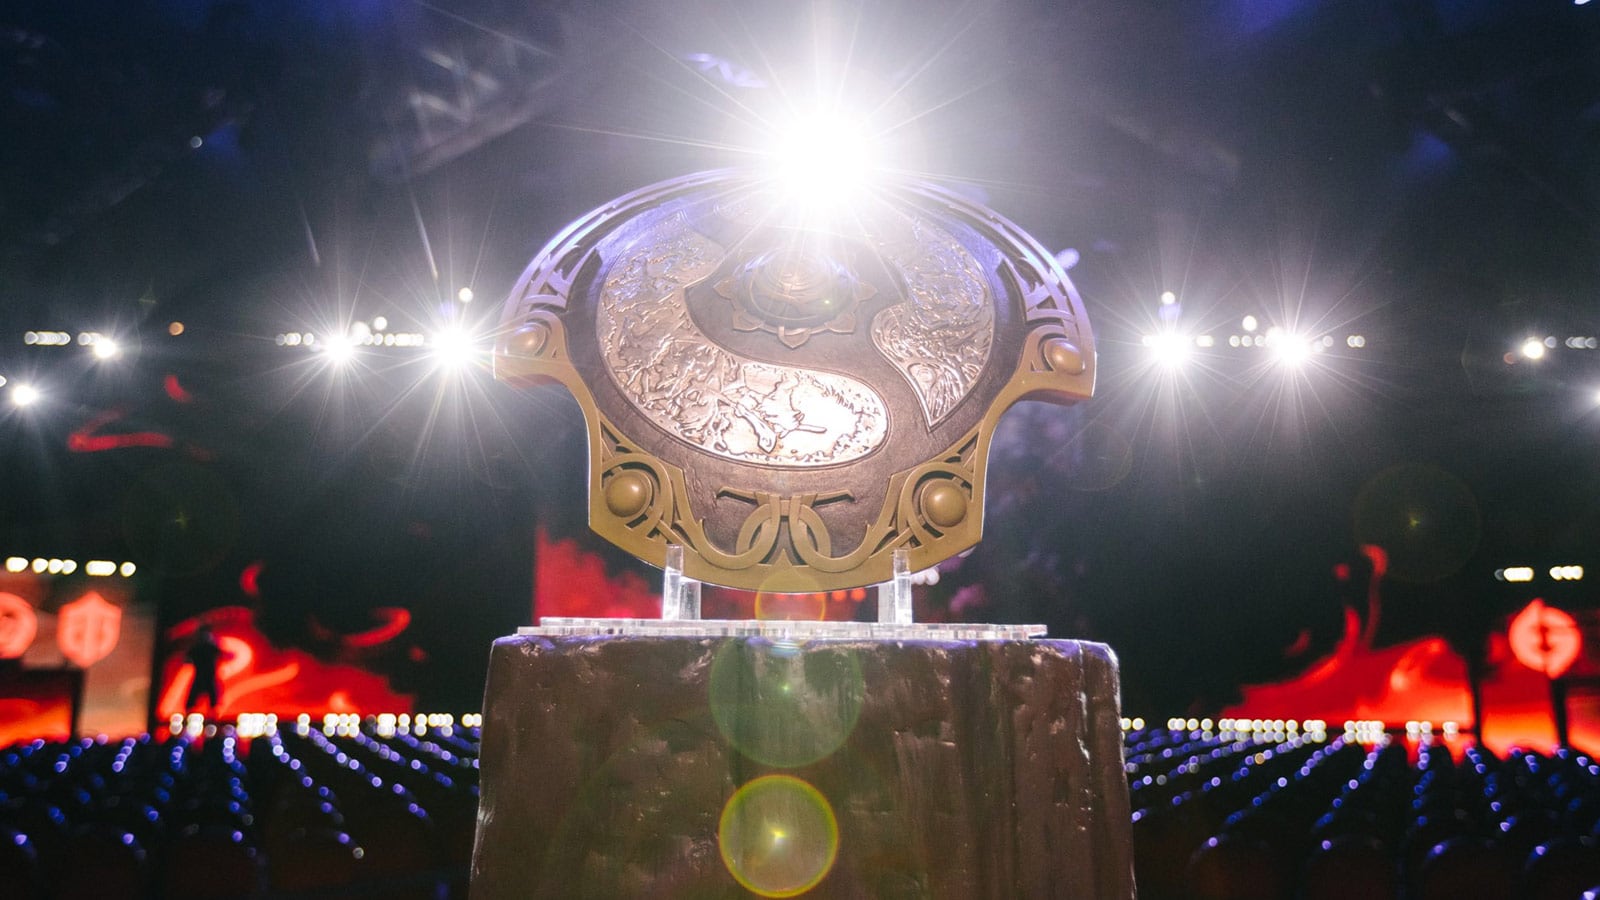 TI12 is going back to its roots this October